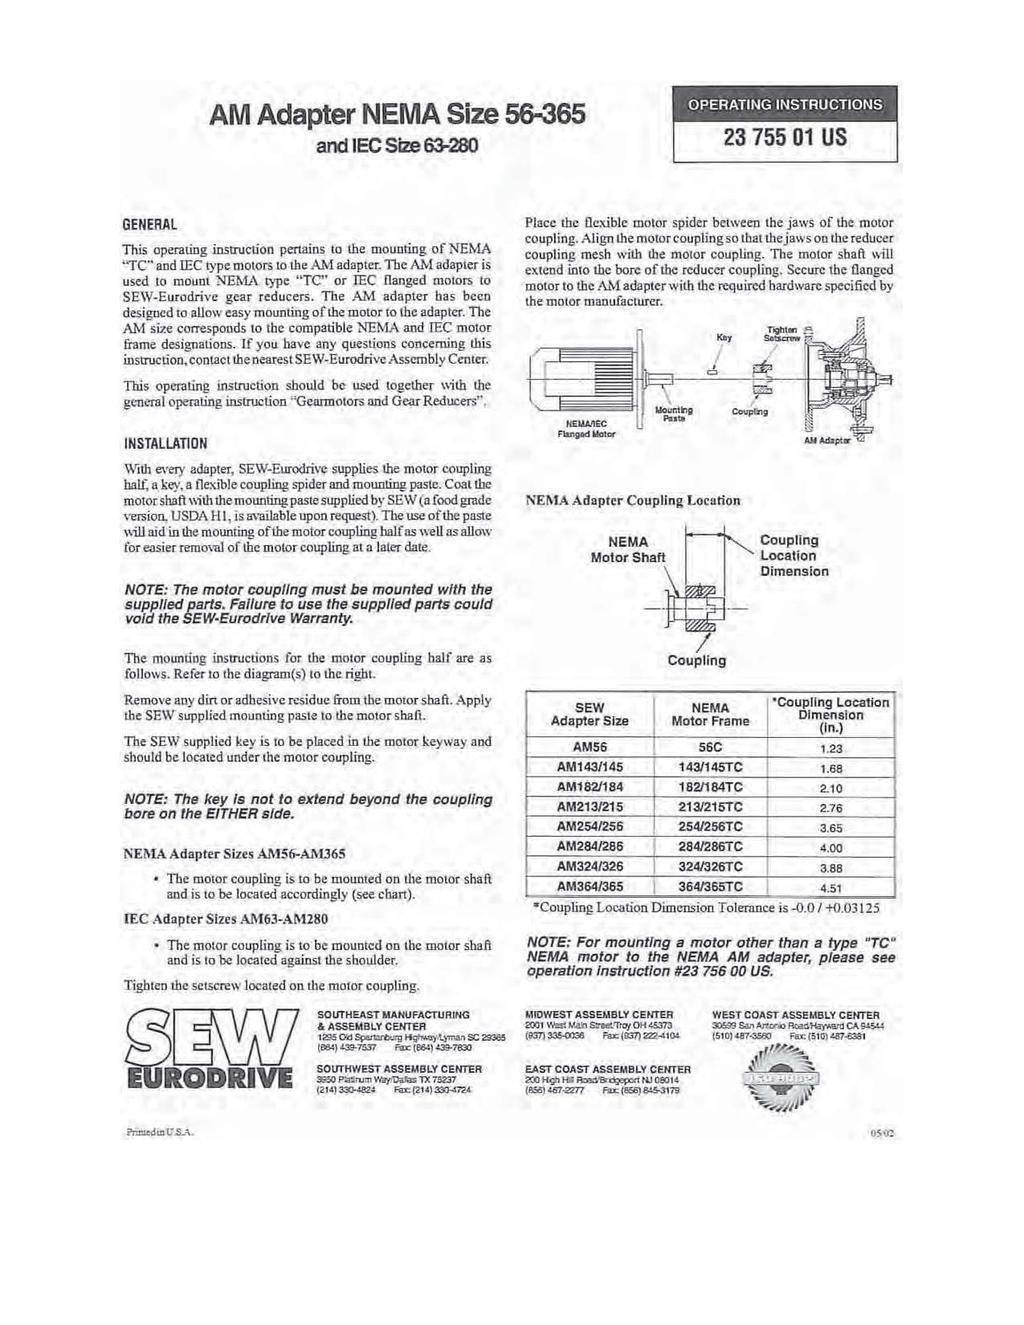 AM Adapter NEMA Size 56-365 and lee Size 63-280 GENERAL This operating Instruction pertains to the mounting or NEMA '"TC"lInd lee type motors to the A.M udopter. The A- adapter is used \0 molln!